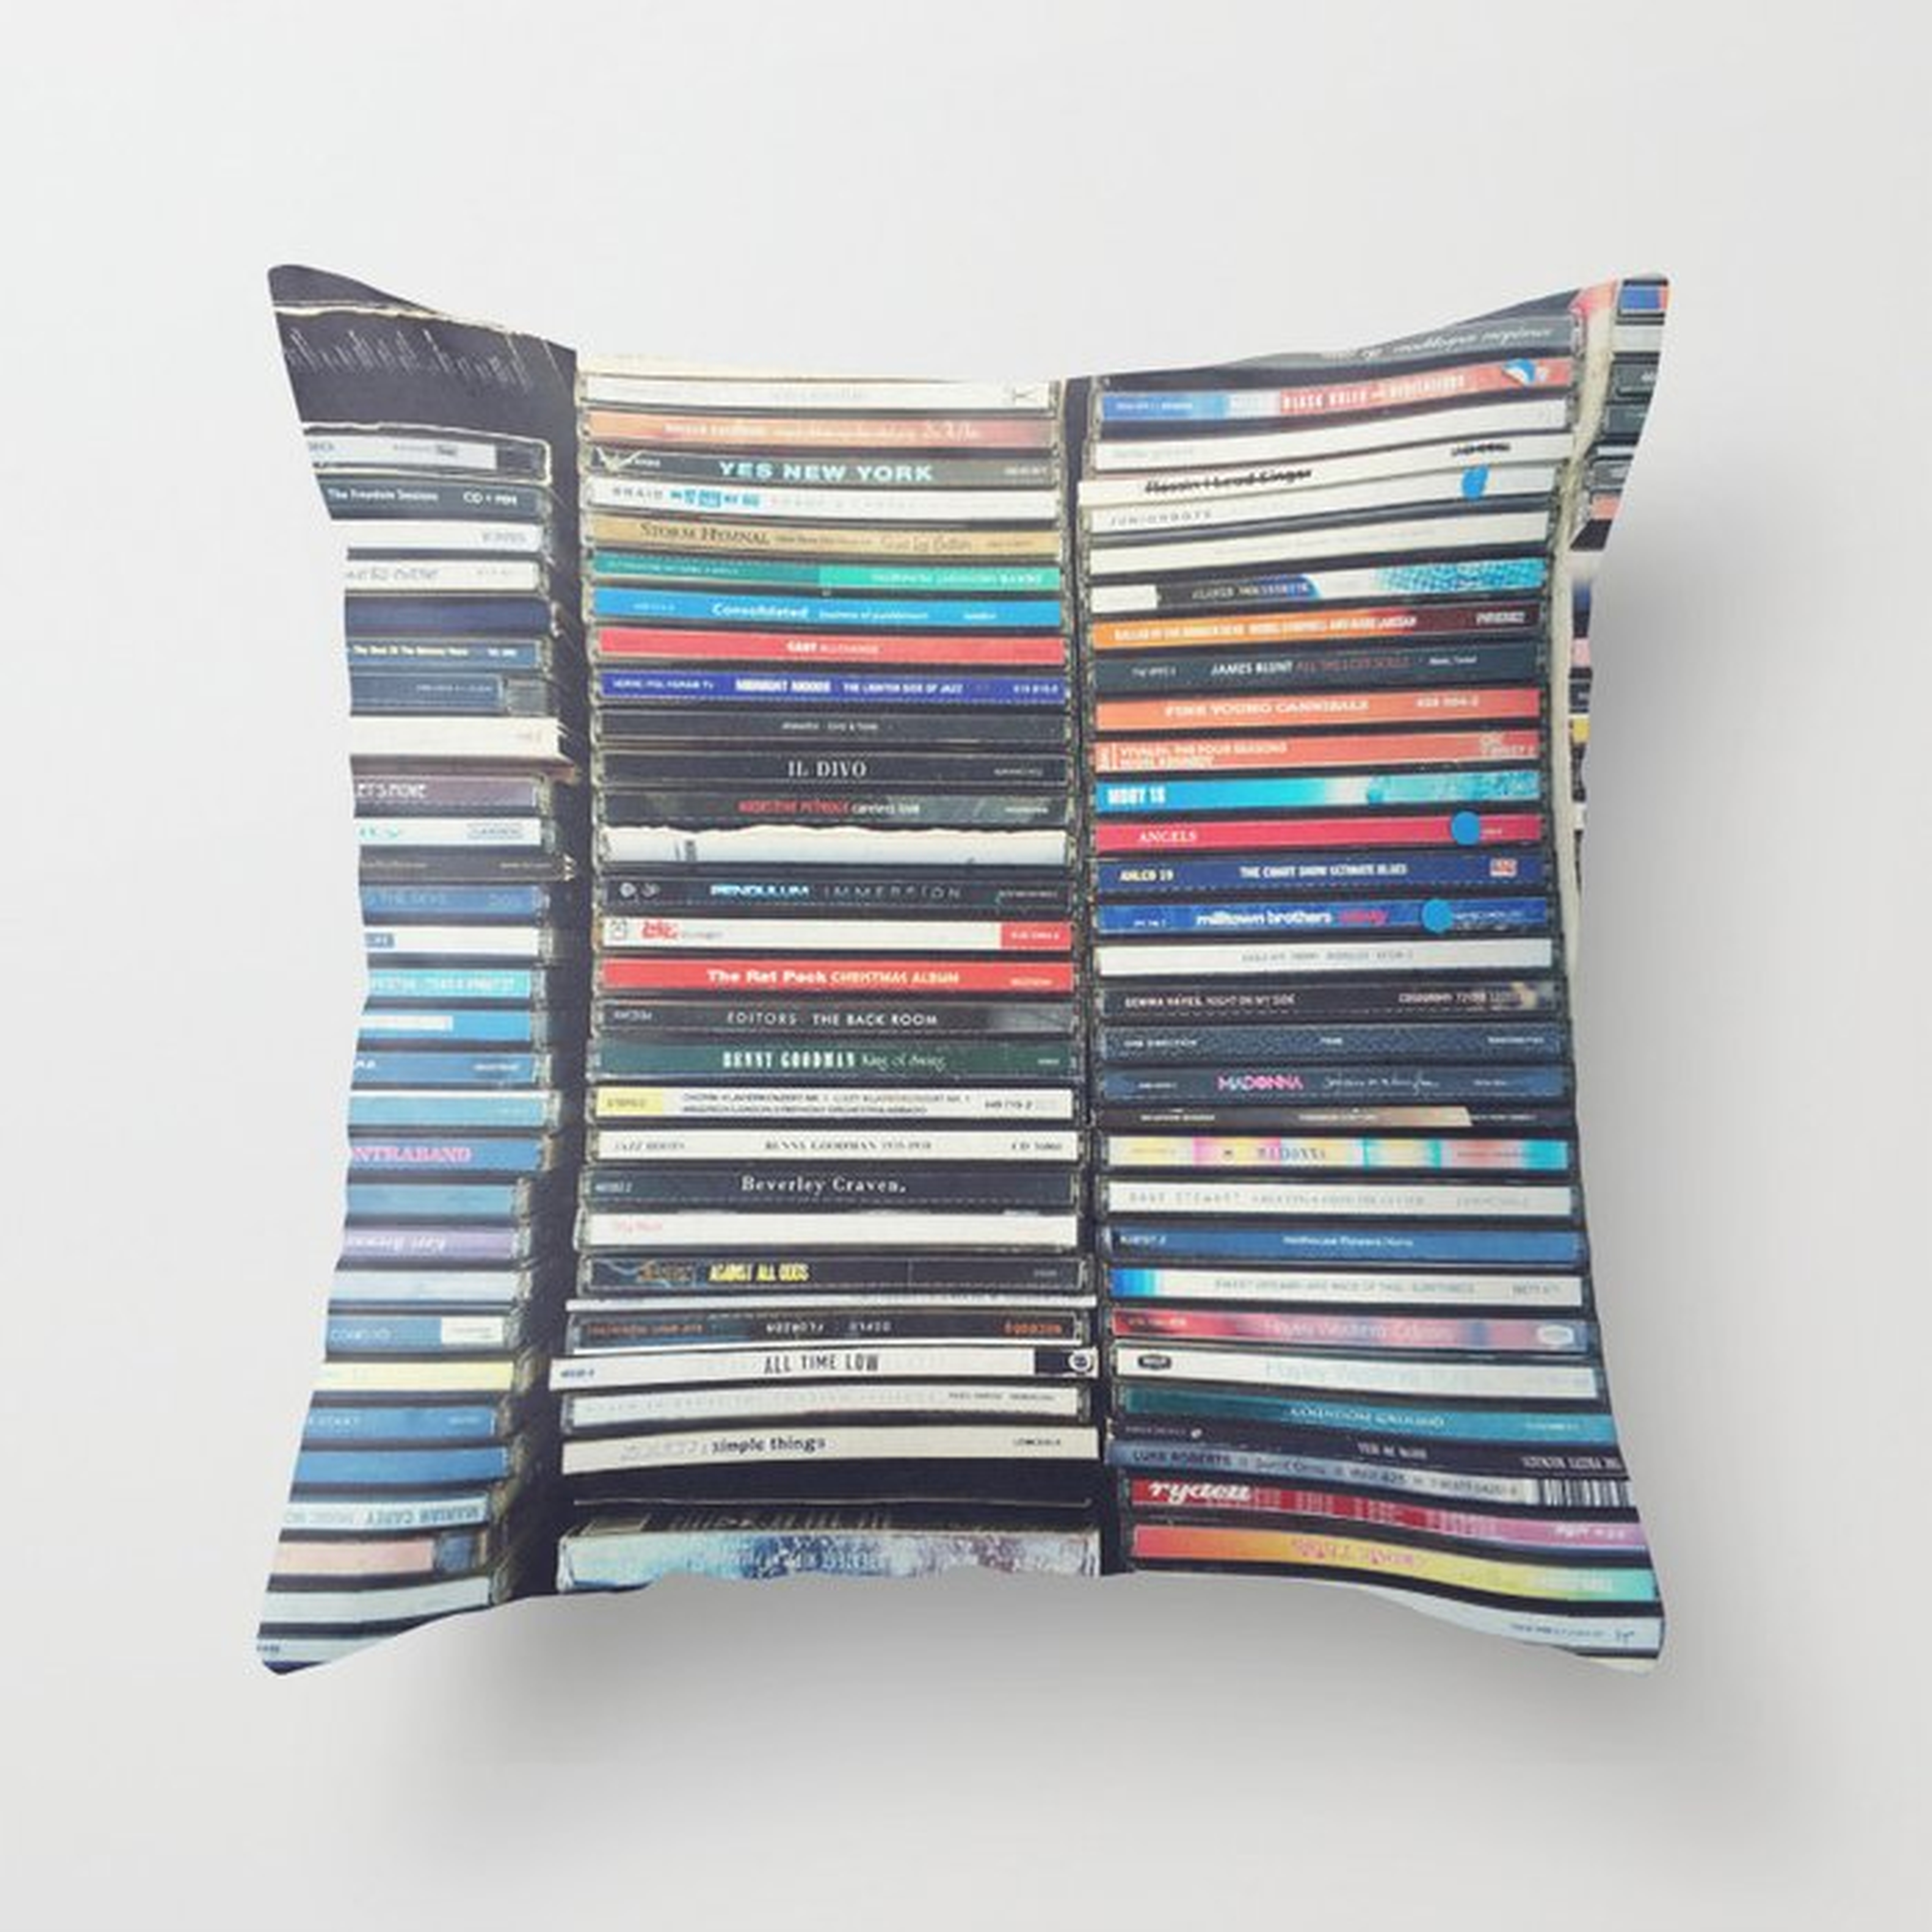 Cd Collection Throw Pillow by Cassia Beck - Cover (18" x 18") With Pillow Insert - Outdoor Pillow - Society6